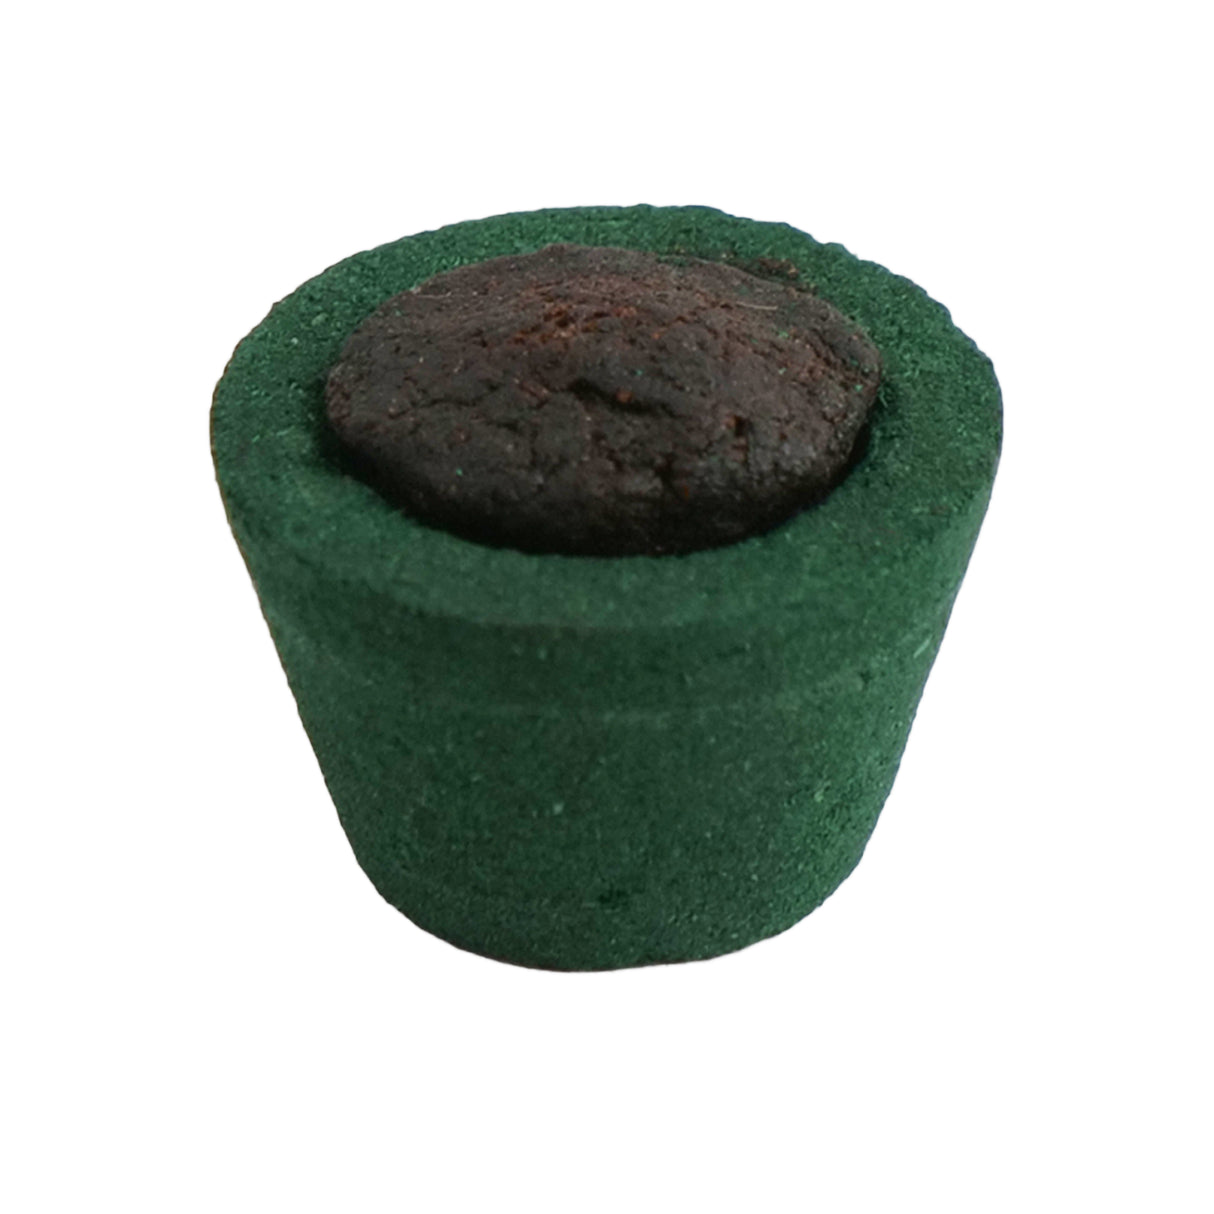 Herbal Sambrani Cups | Pack Size: 50 g